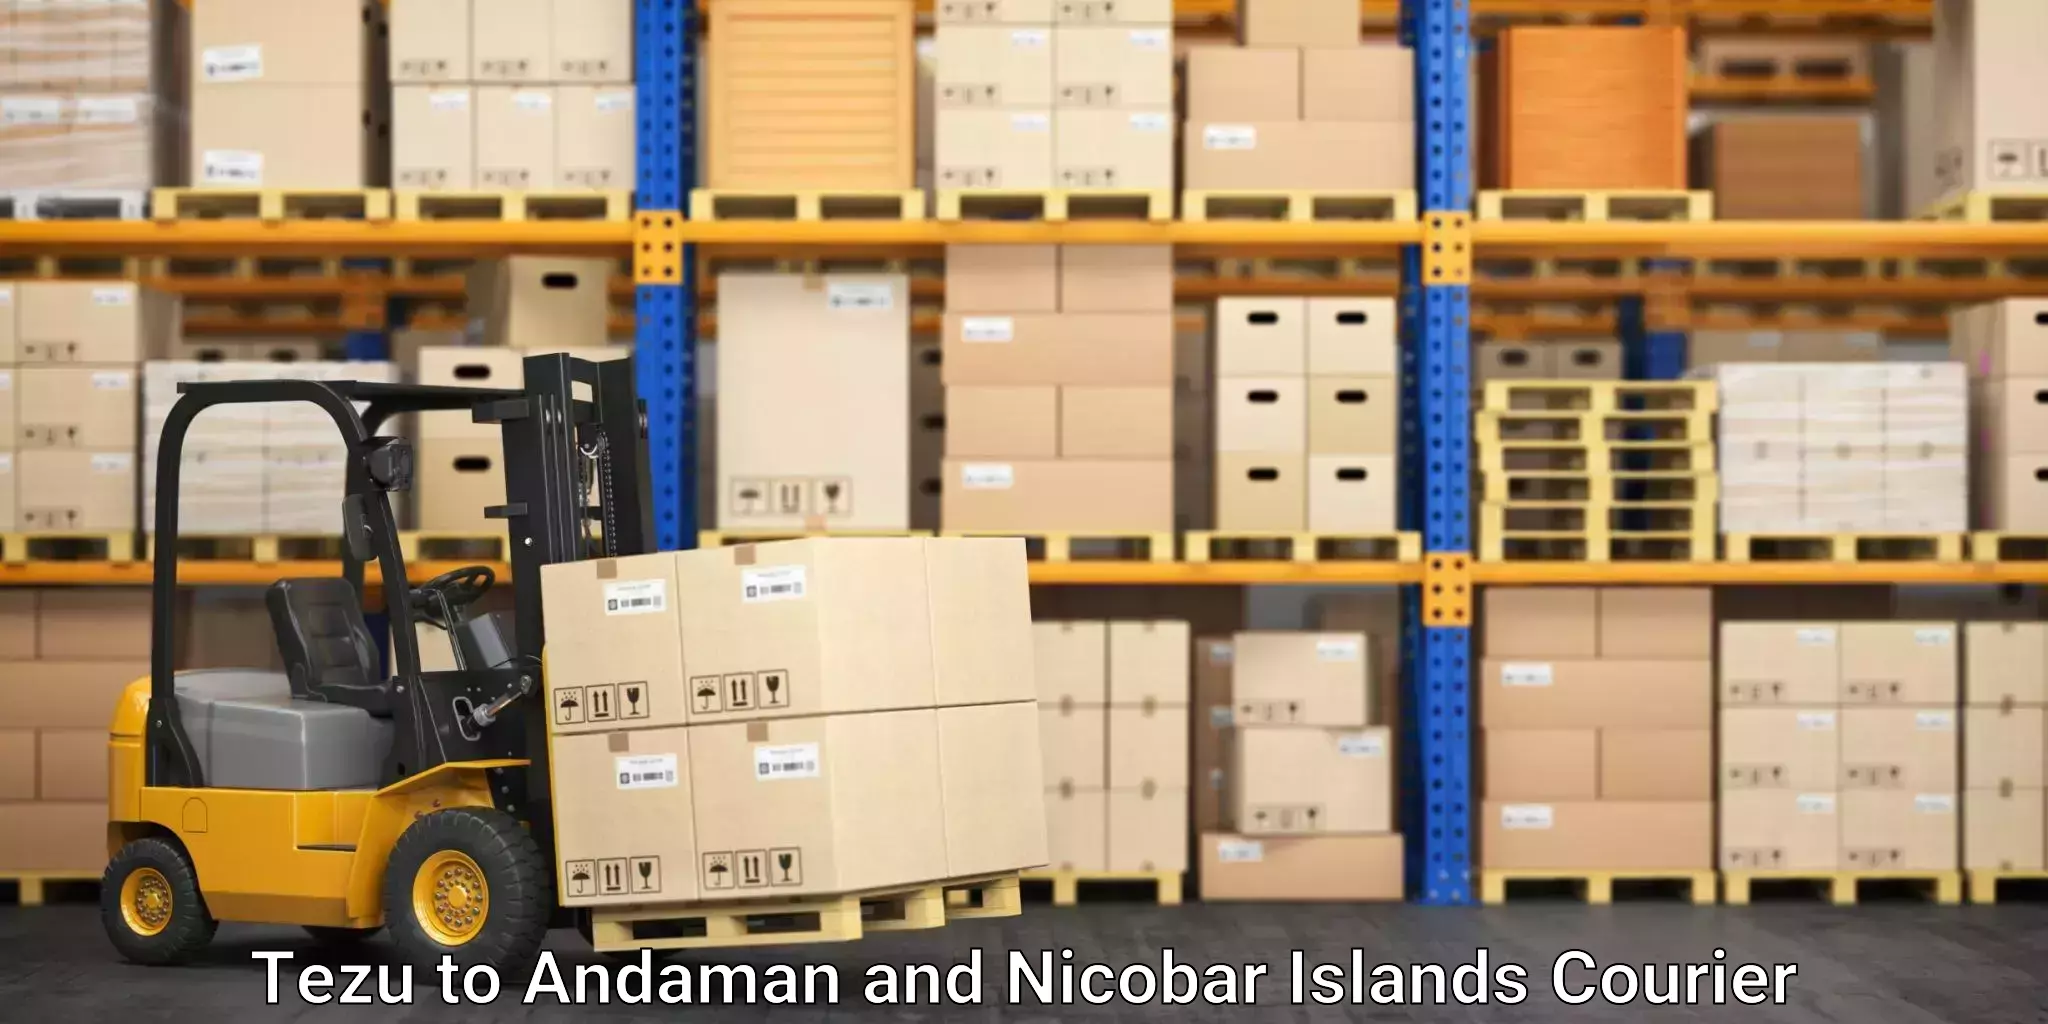 Affordable parcel service Tezu to Andaman and Nicobar Islands